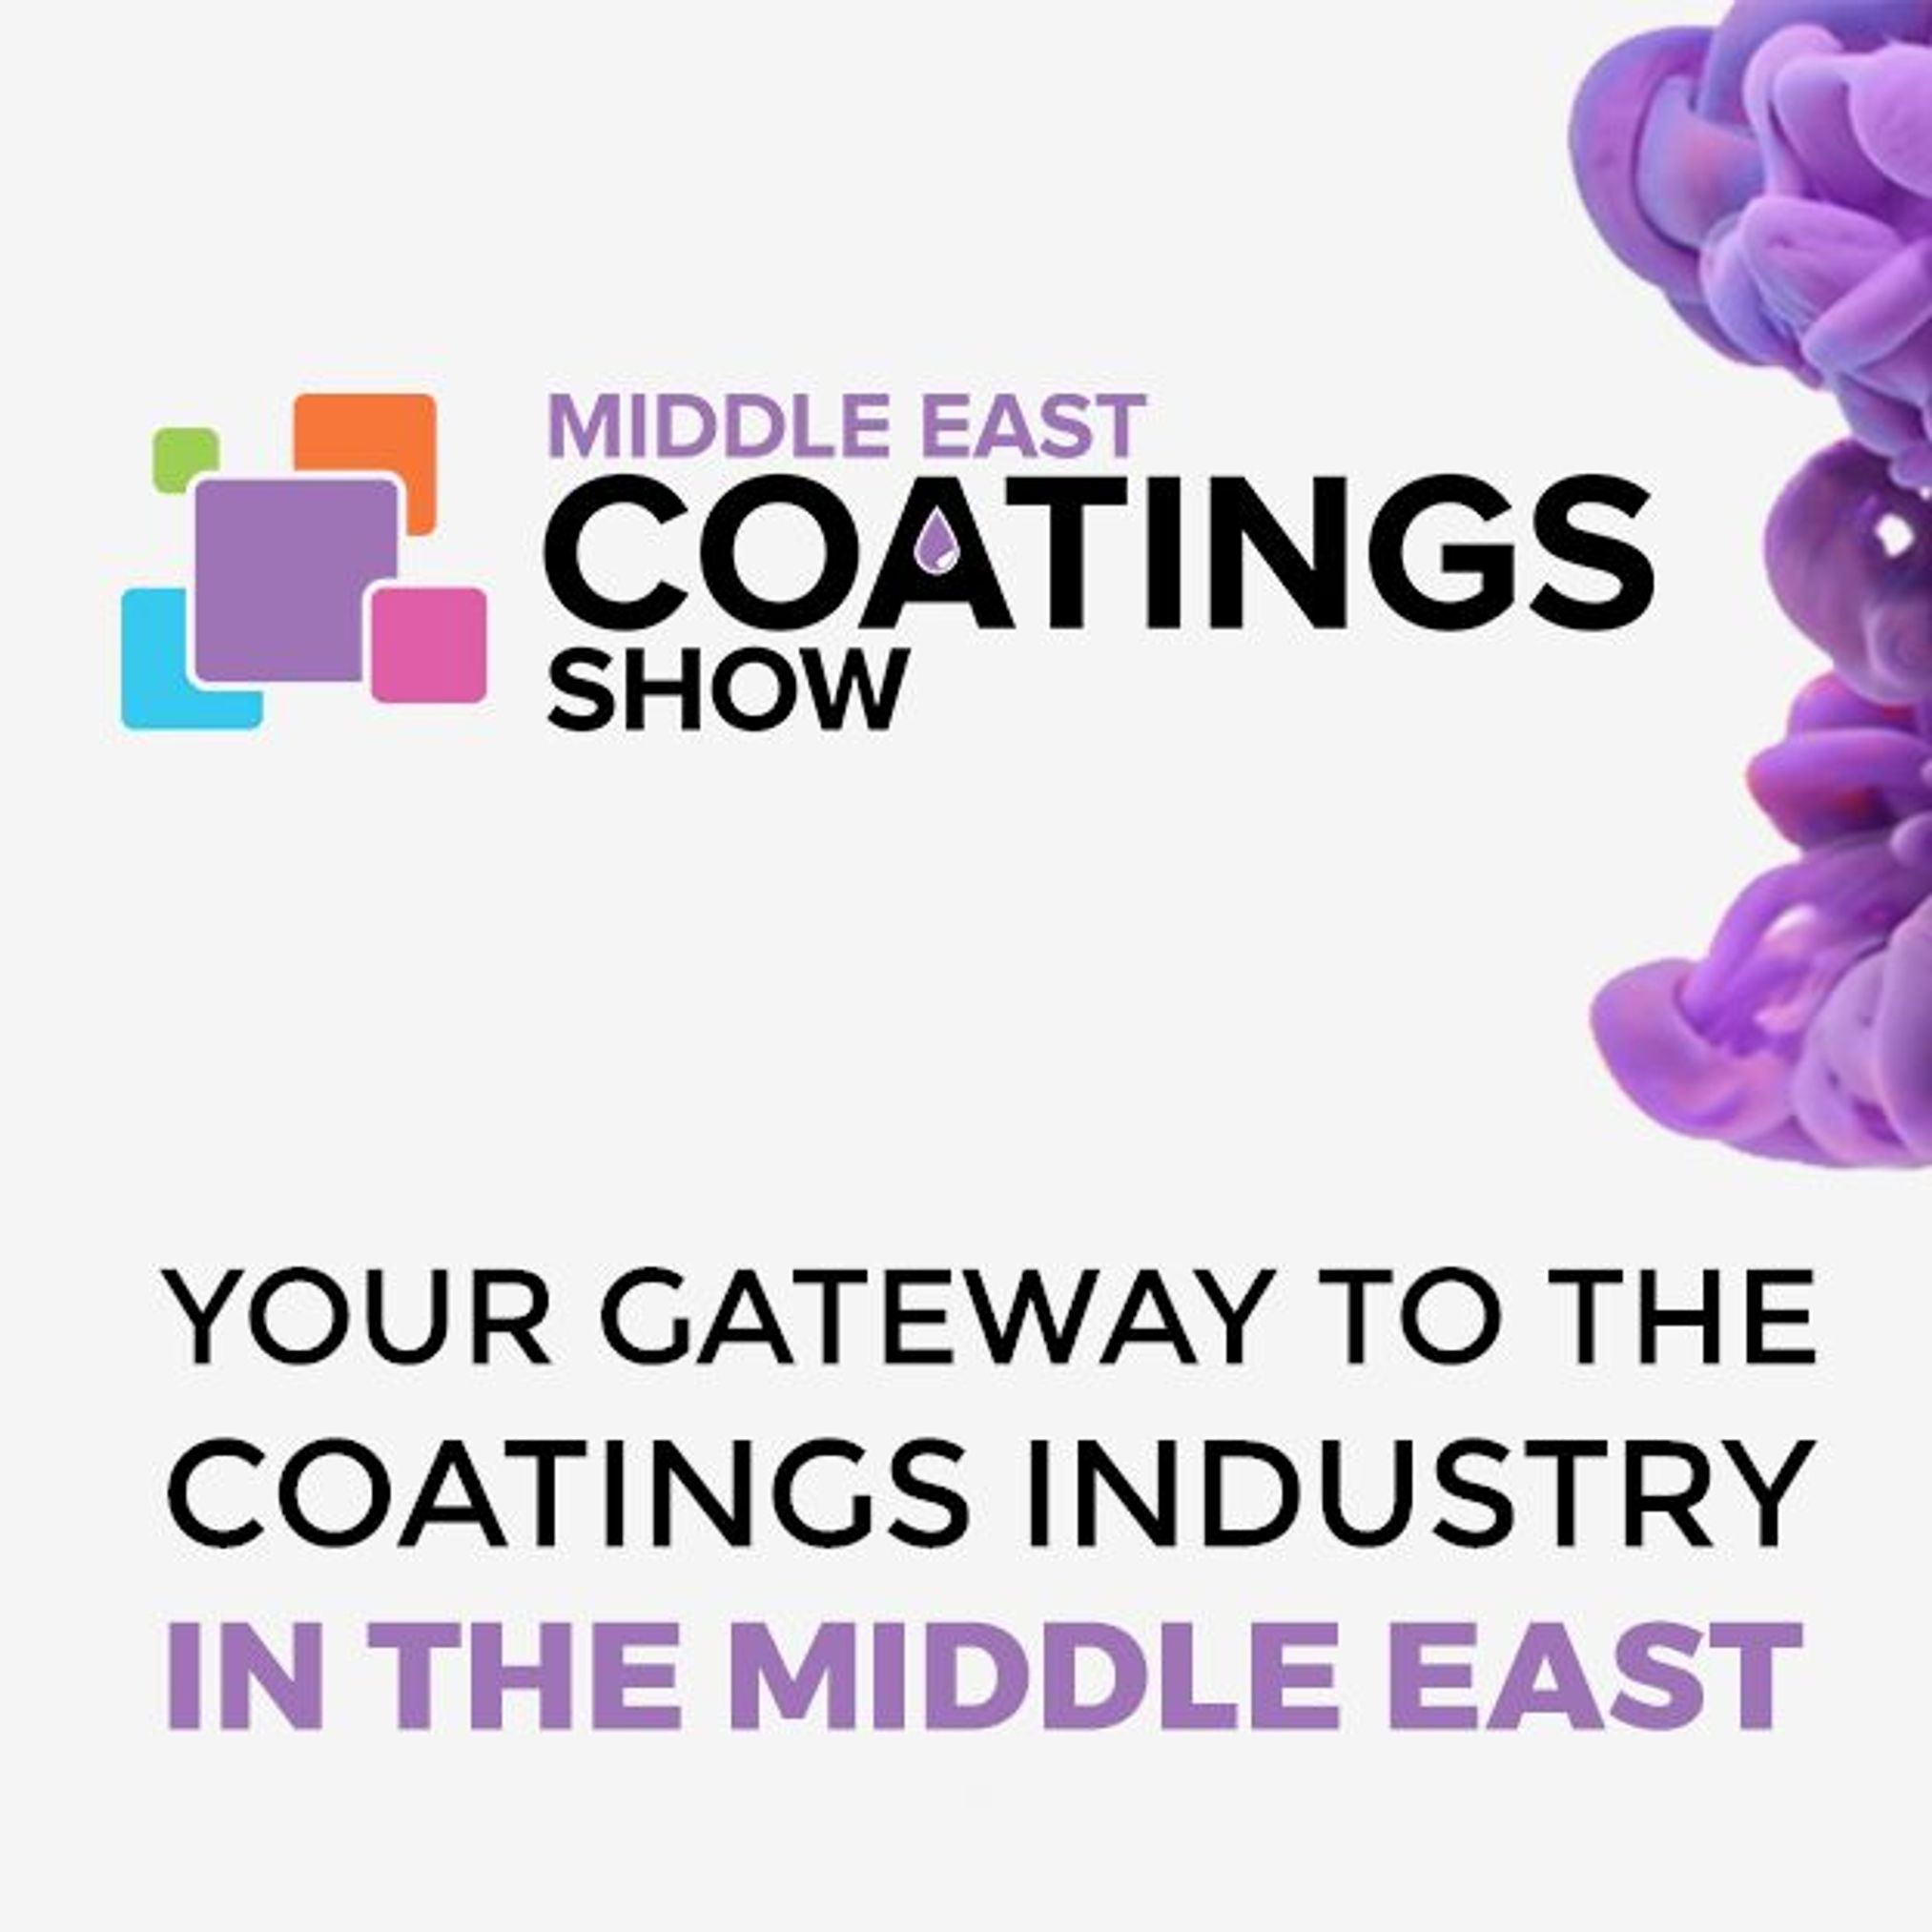 Middle east coating show